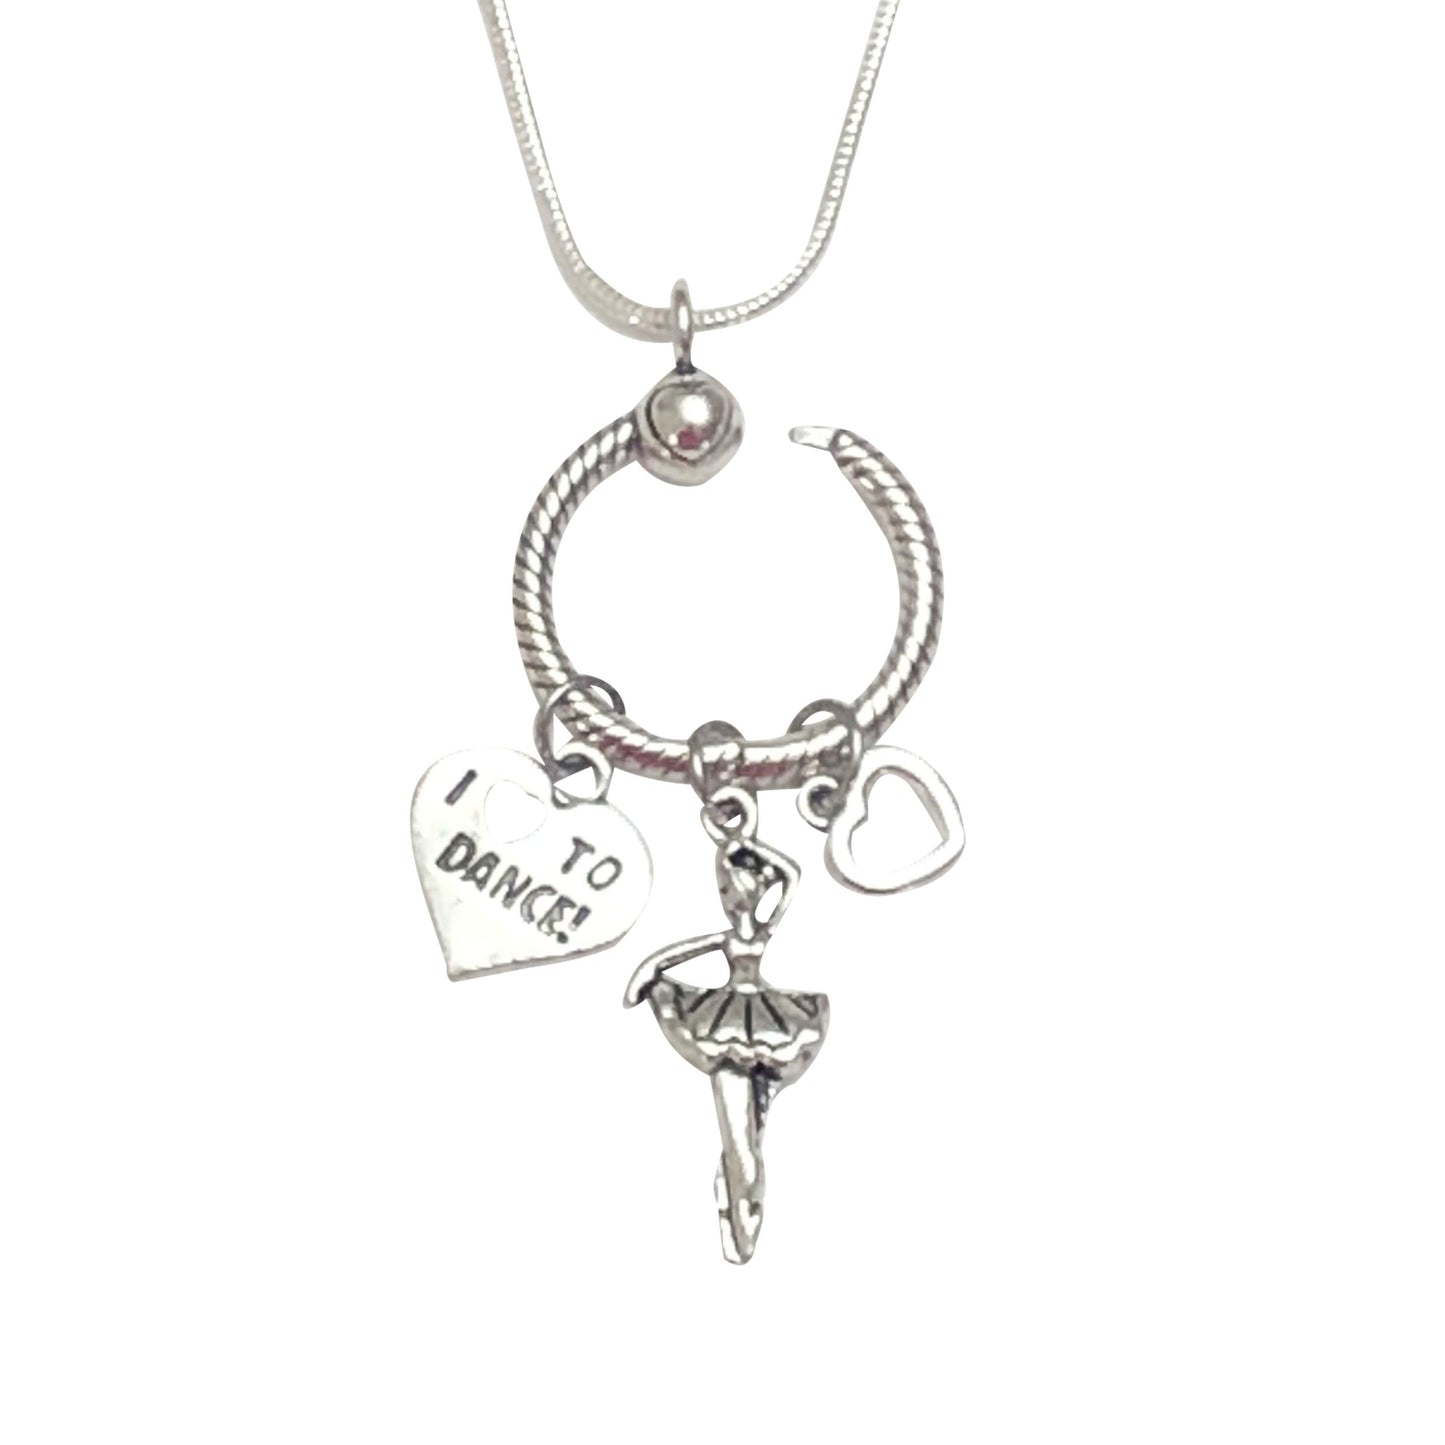 Dance Sterling Silver Necklace with Charm Holder - Cheer and Dance On Demand